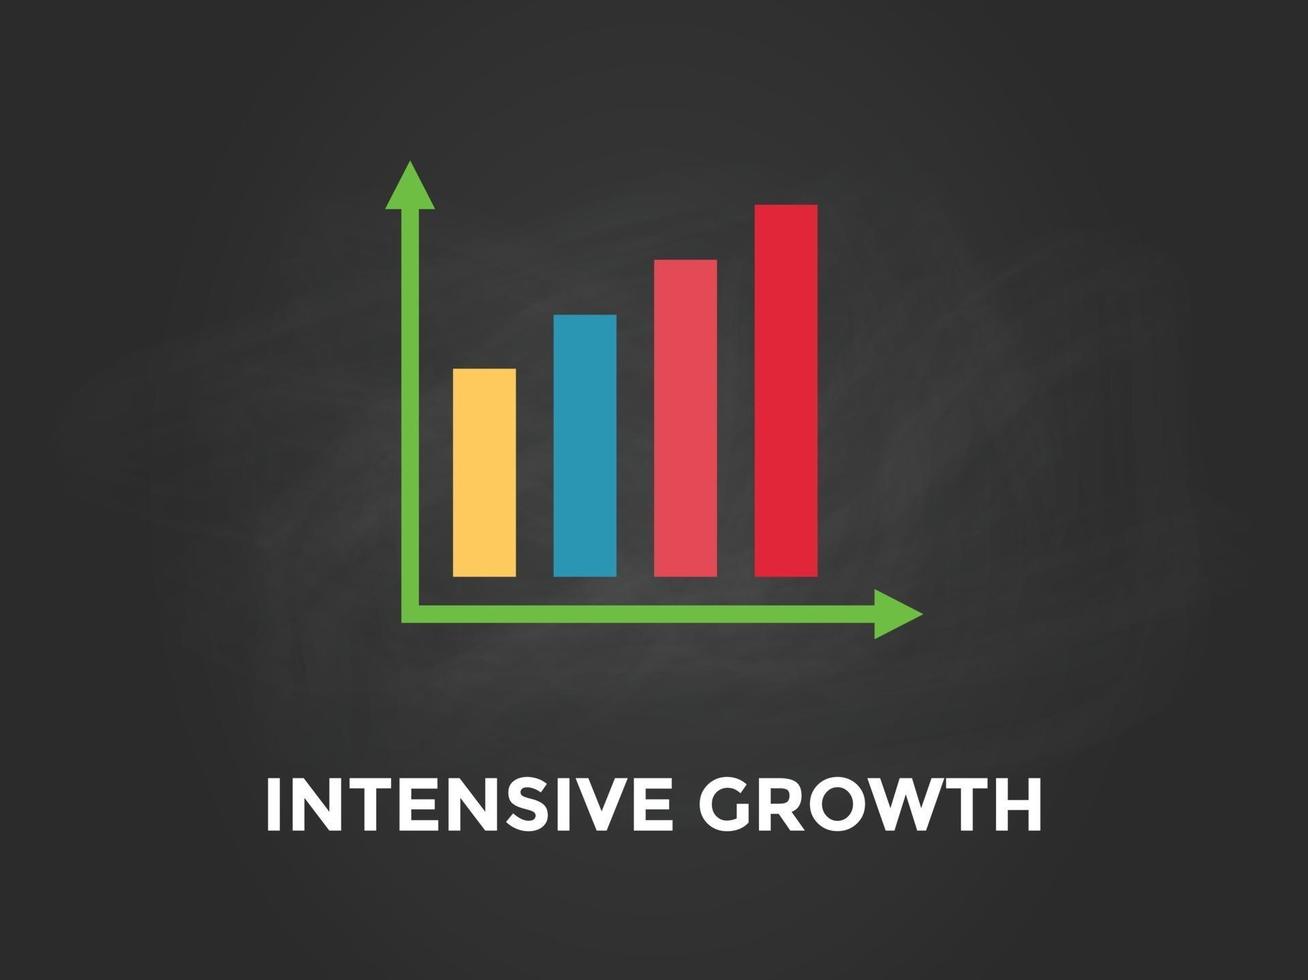 Intensive growth chart illustration with colourful bar, white text and black background vector